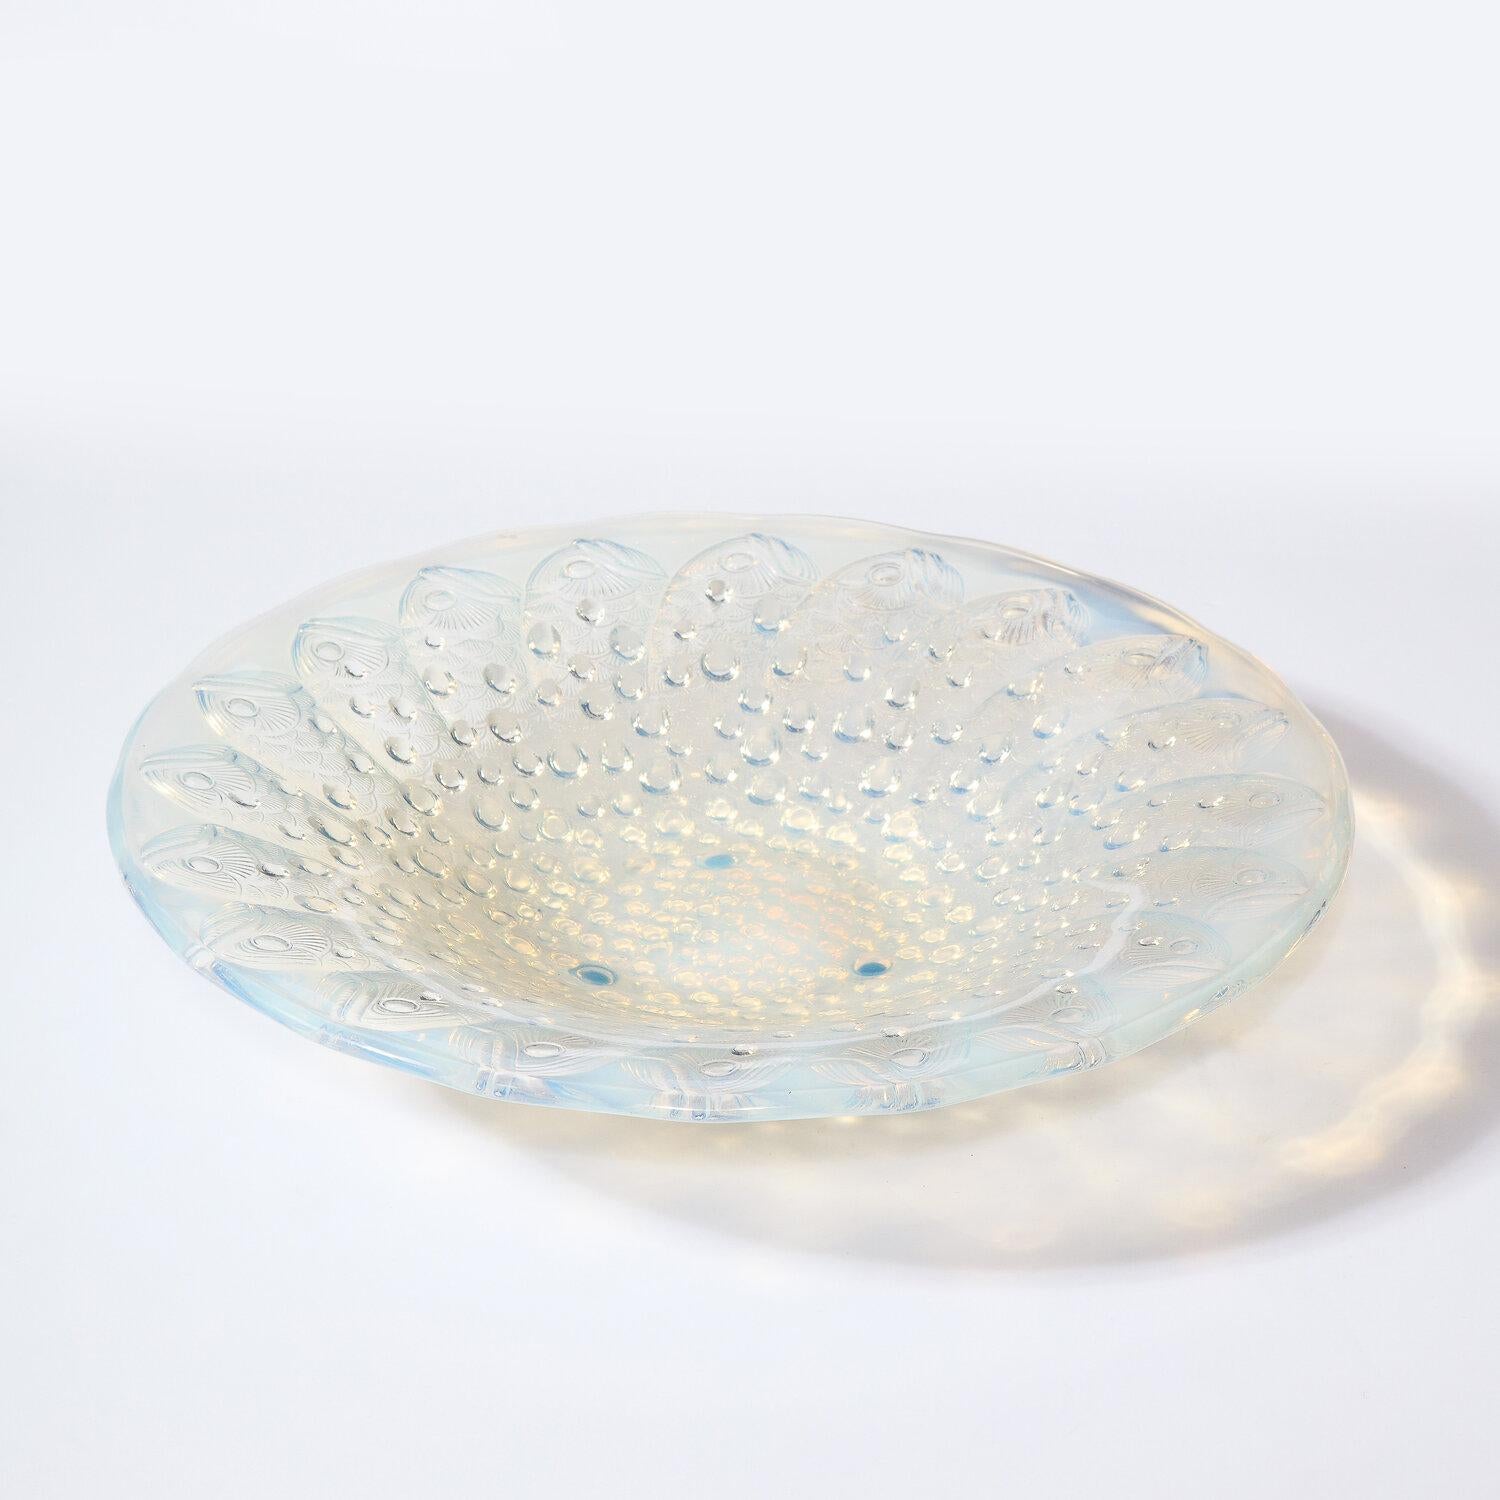 This stunning Art Deco center bowl was realized by the legendary maker Lalique in France circa 1925. Created in a beautiful opalescent glass, the piece offers a repeating concentric stylized fish motif as well as spherical detailing in relief. With